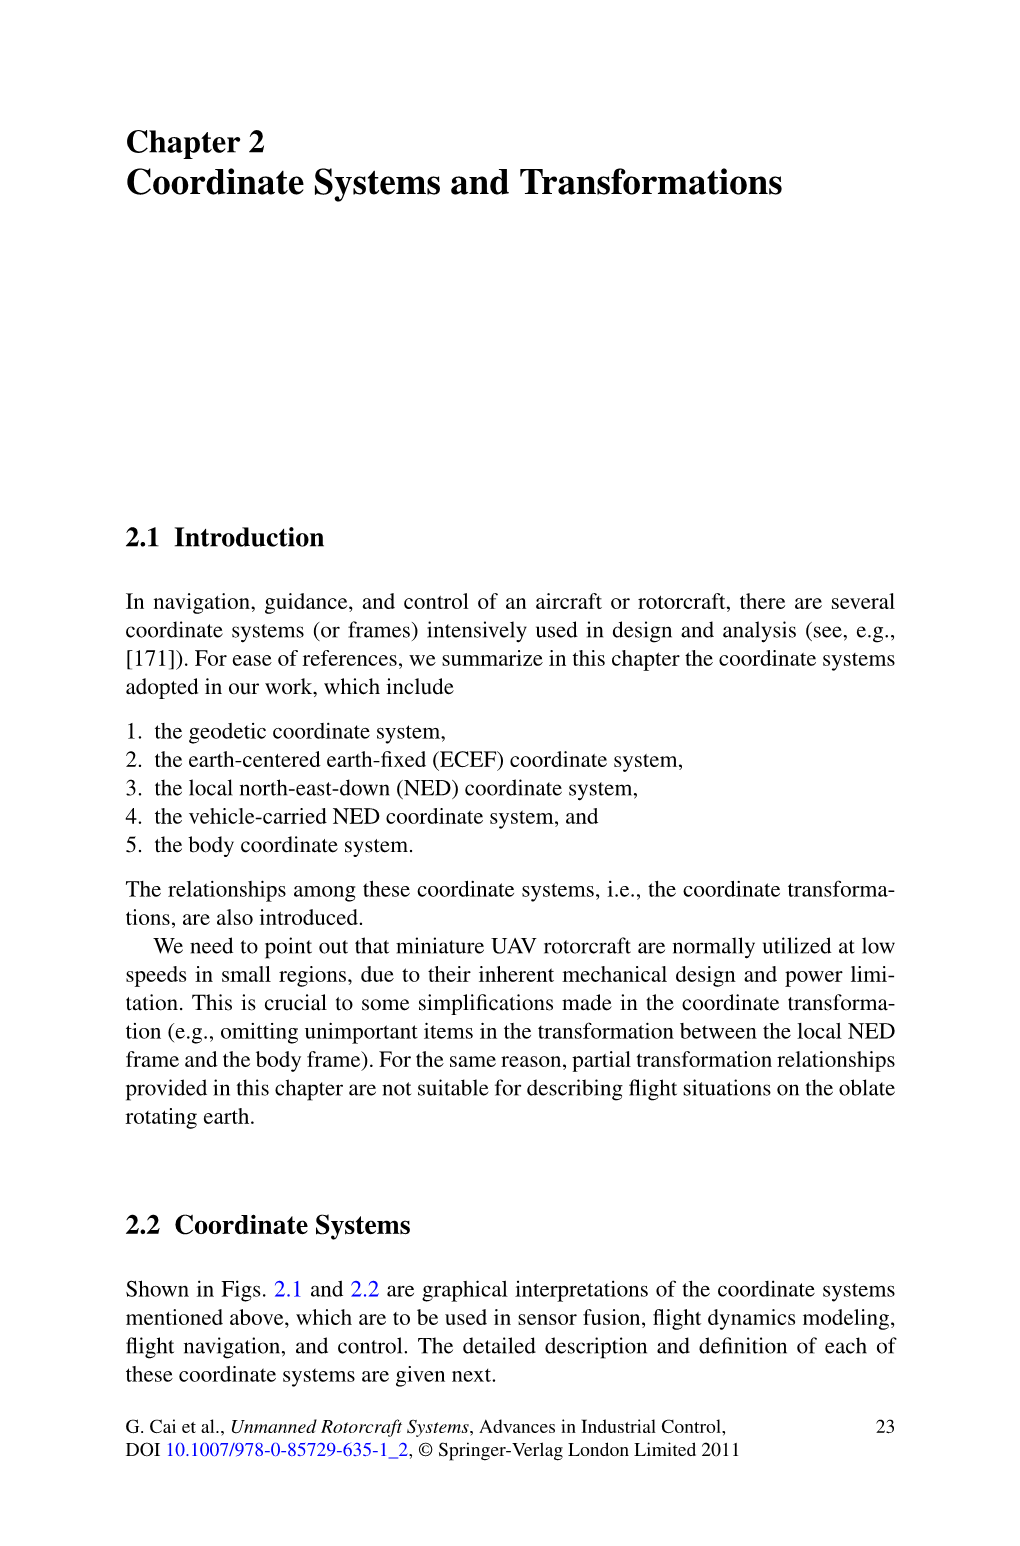 Coordinate Systems and Transformations